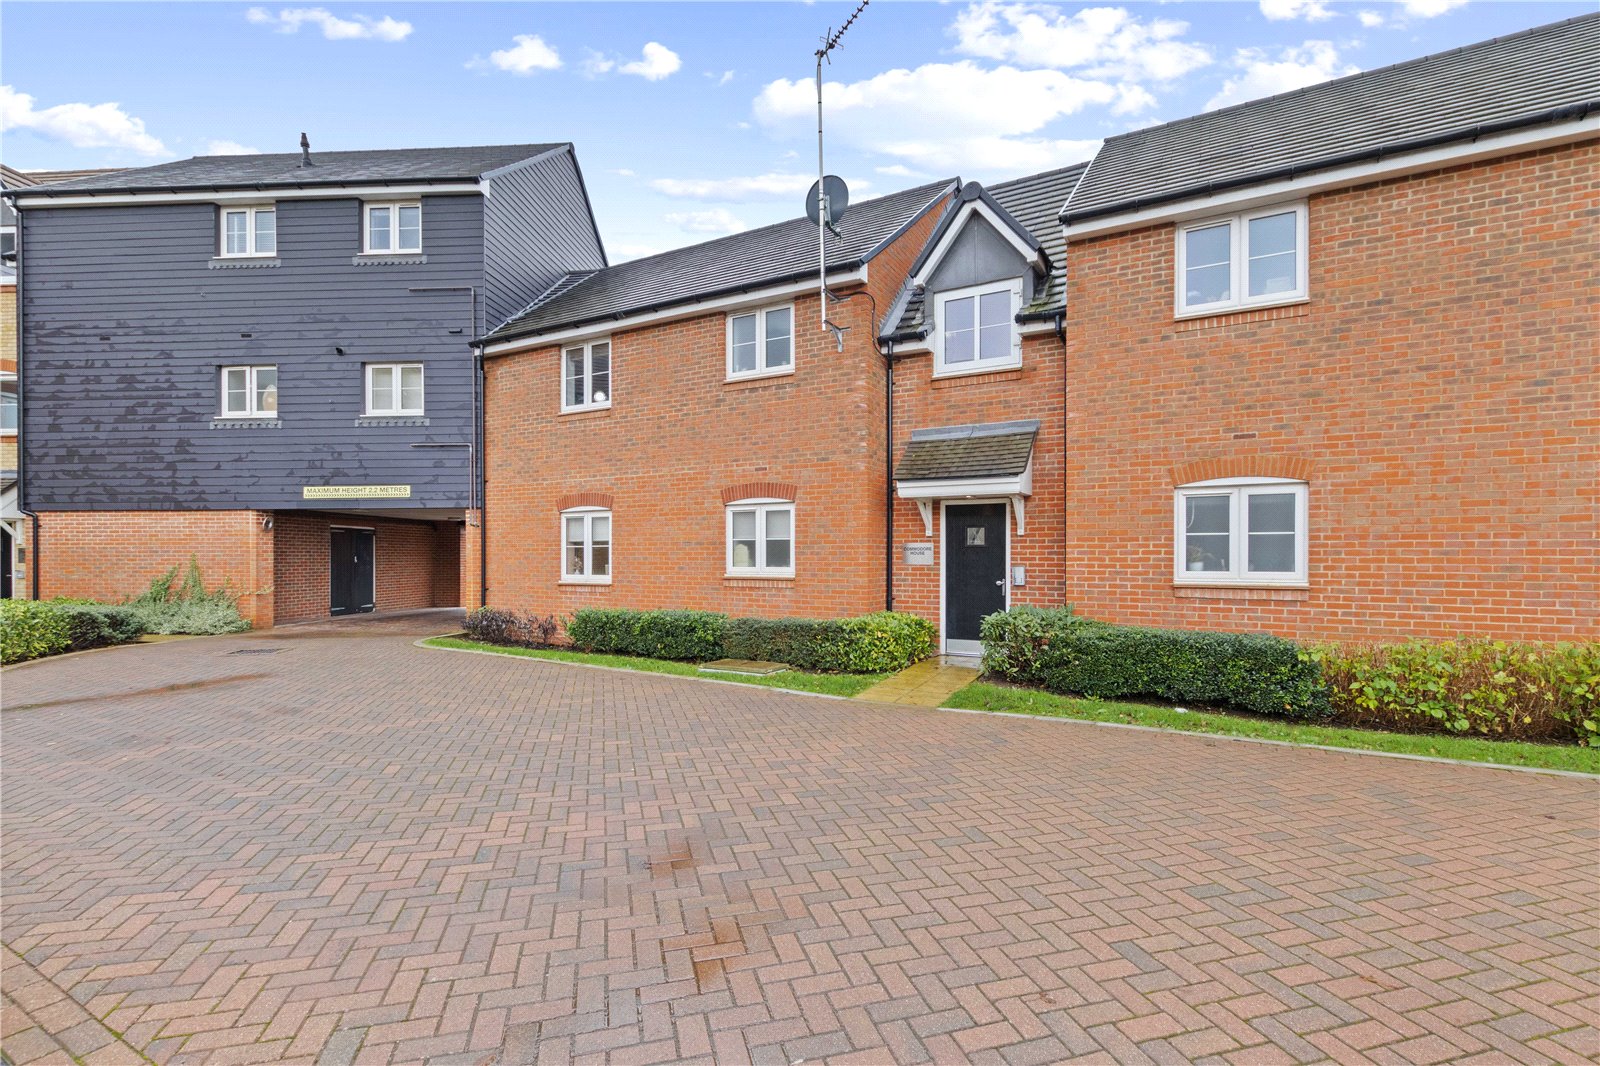 1 bed apartment for sale in Tern Crescent, Chichester - Property Image 1